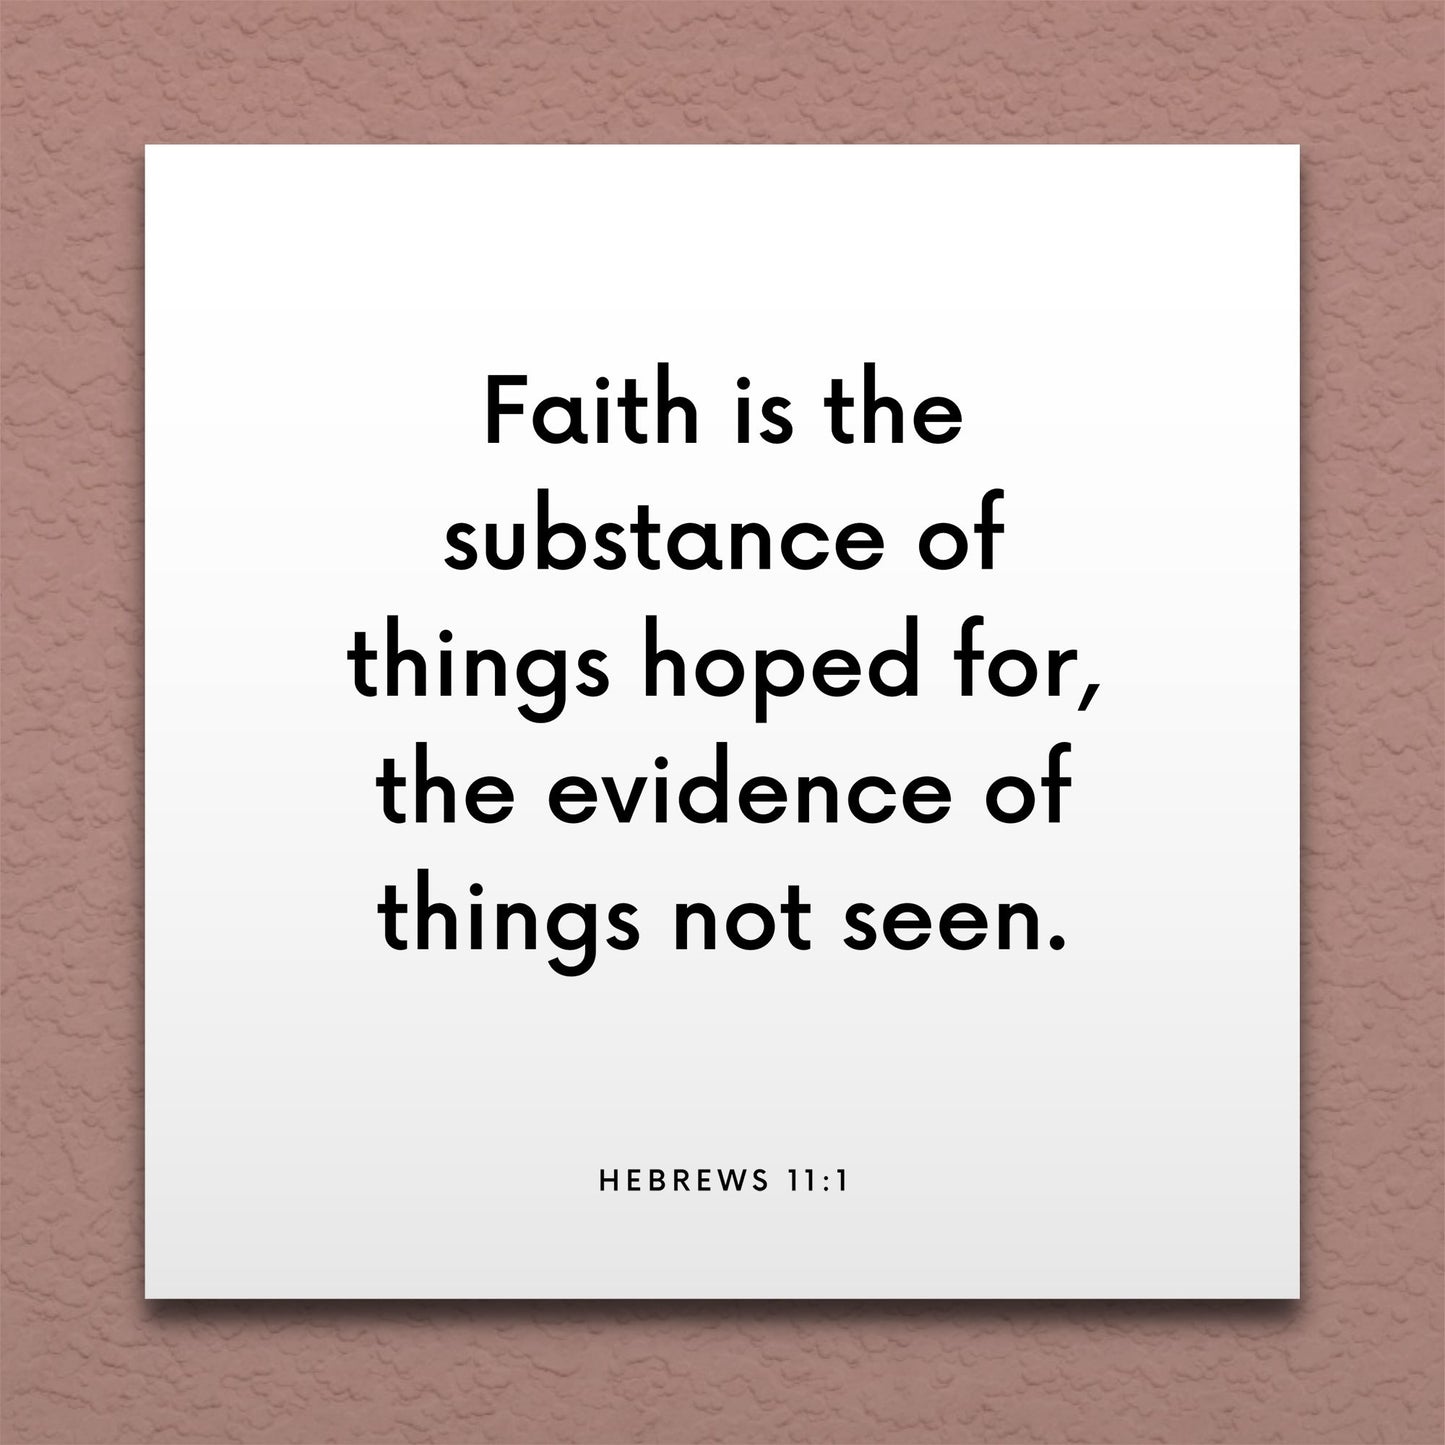 Wall-mounted scripture tile for Hebrews 11:1 - "Faith is the substance of things hoped for"